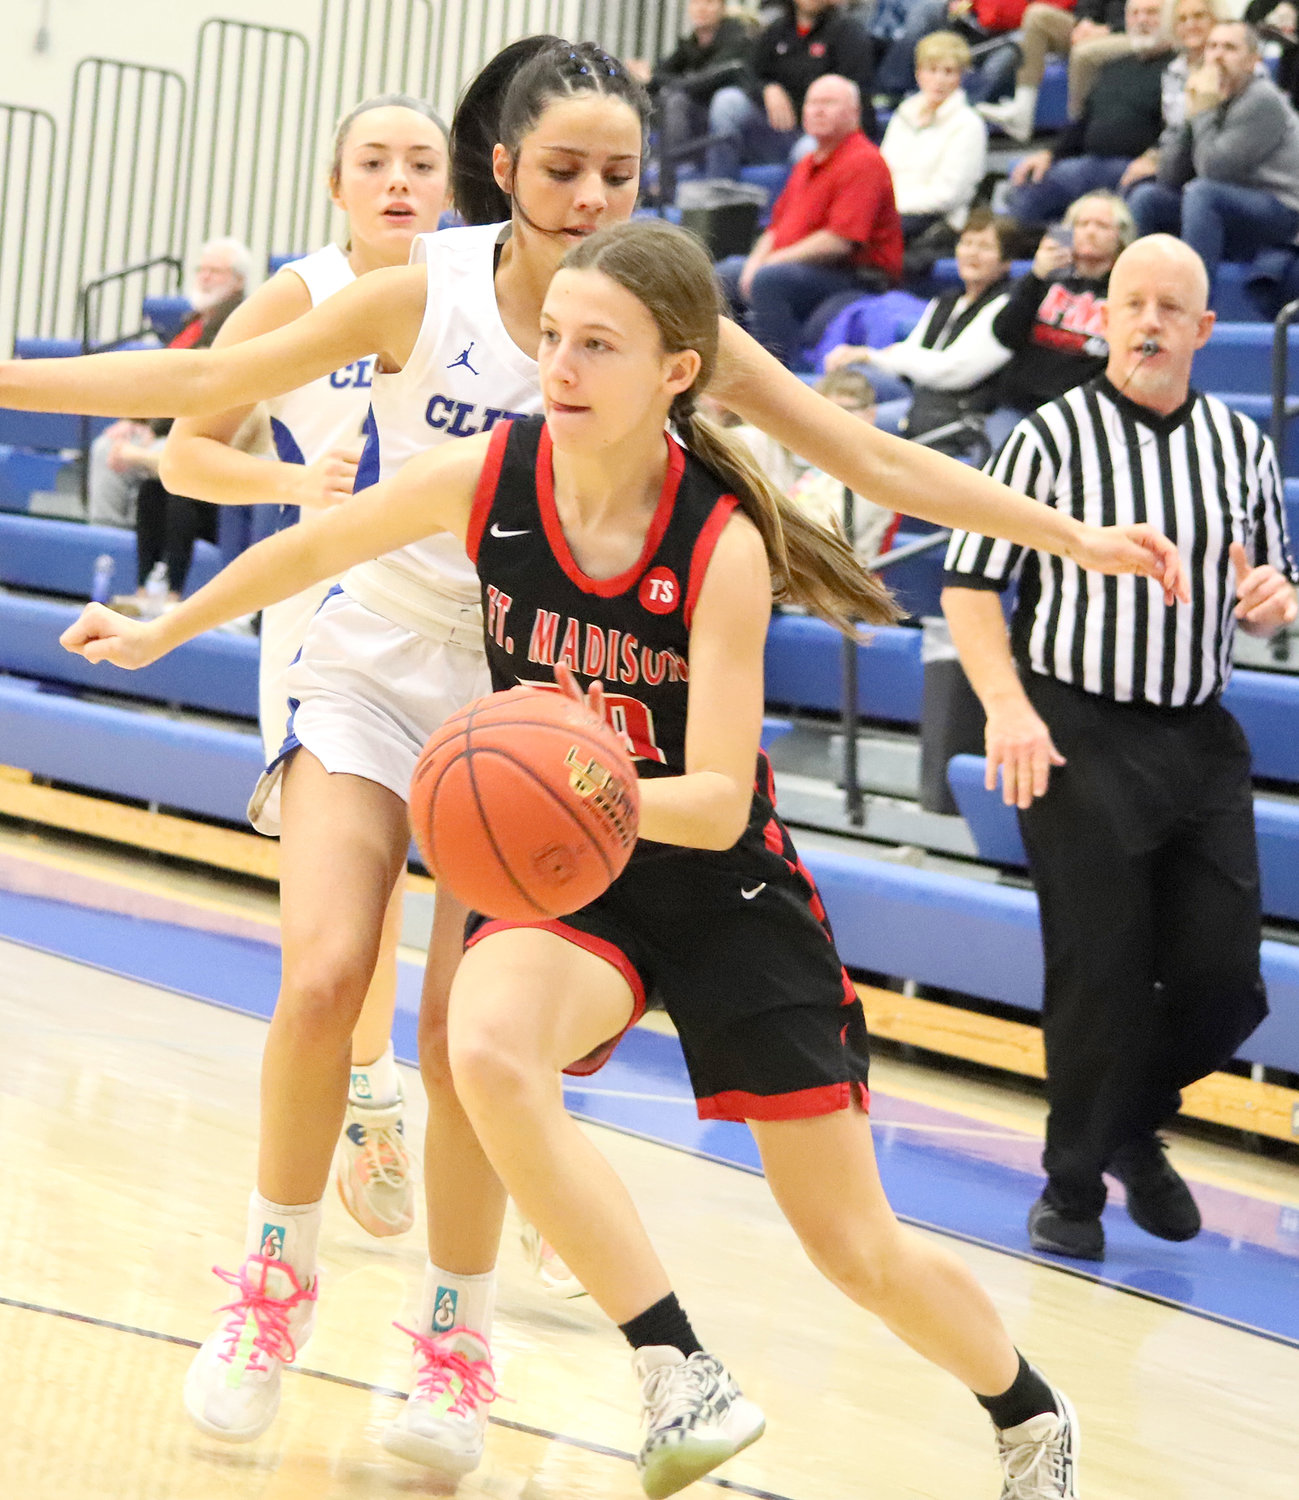 Freshman Hadley Wolfe drives past the Clippers defense in the first period. The Hounds ended their season with a 62-28 loss to Clear-Creek Amana.